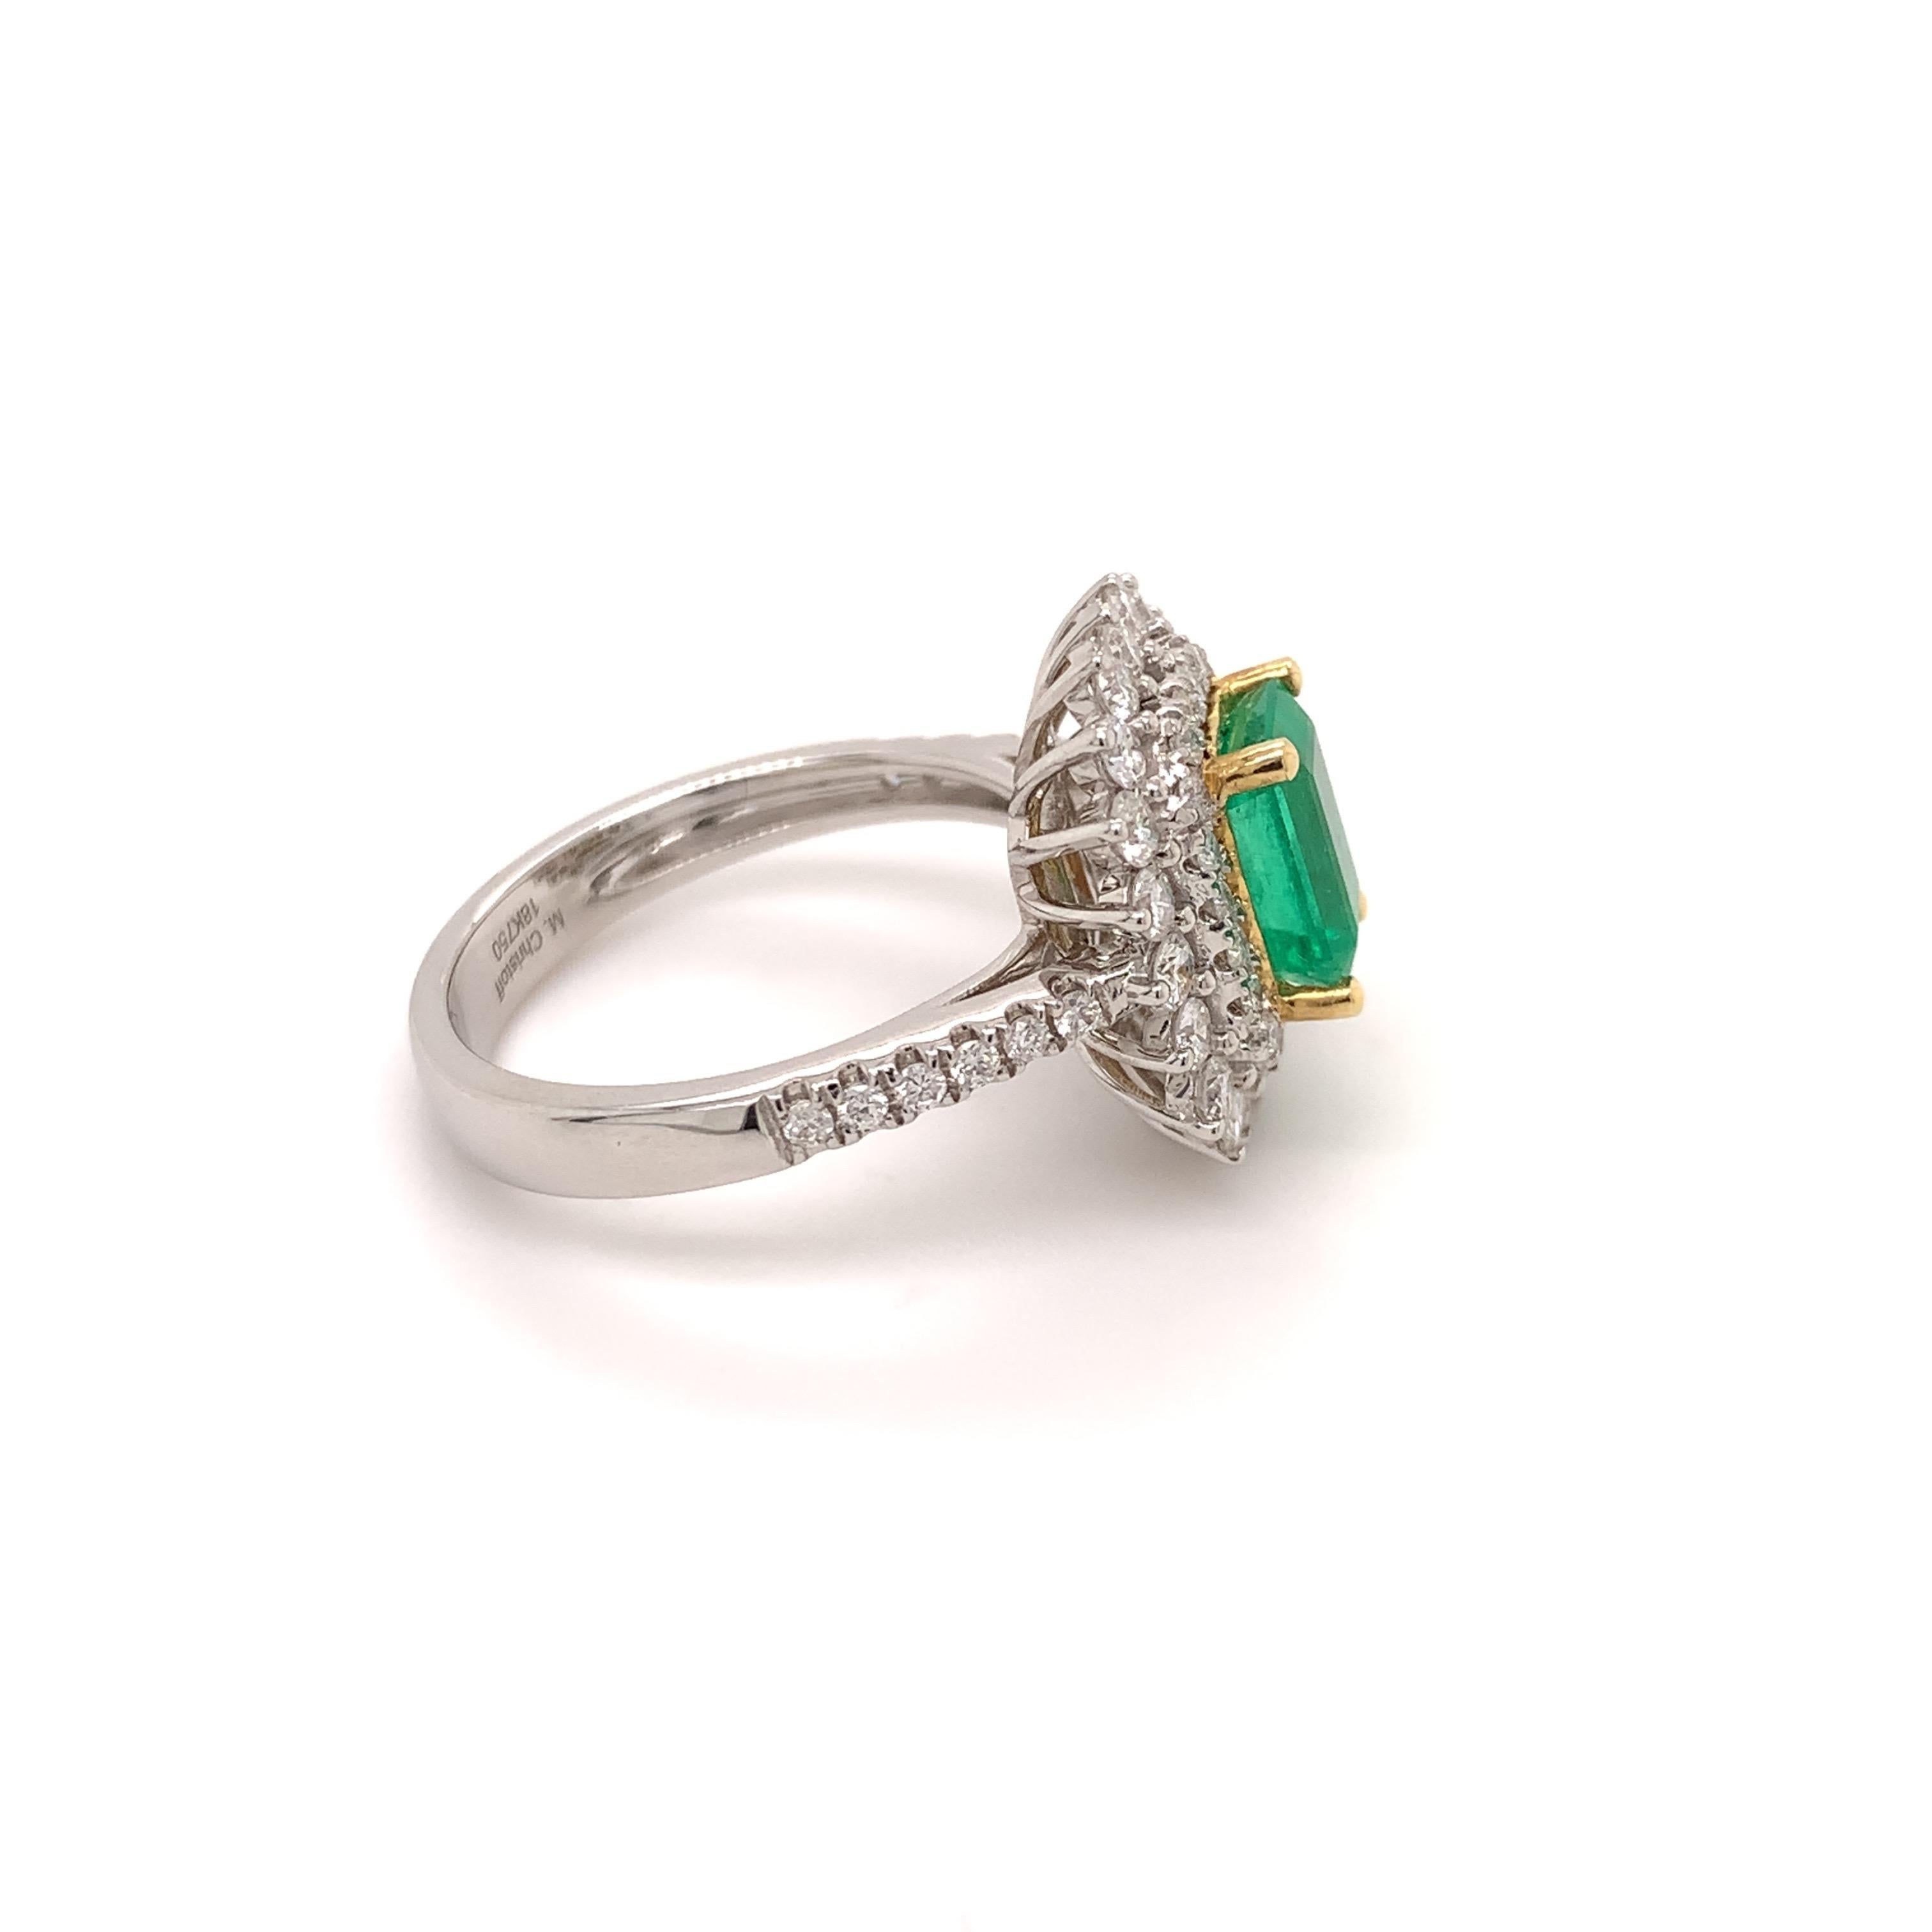 Stunning emerald diamond ring. Lively green tone, high brilliance, emerald faceted 1.35 carats natural emerald encased in high profile mount with four bead prongs, accented with two rows of round brilliant cut diamonds. 
The handcrafted design is